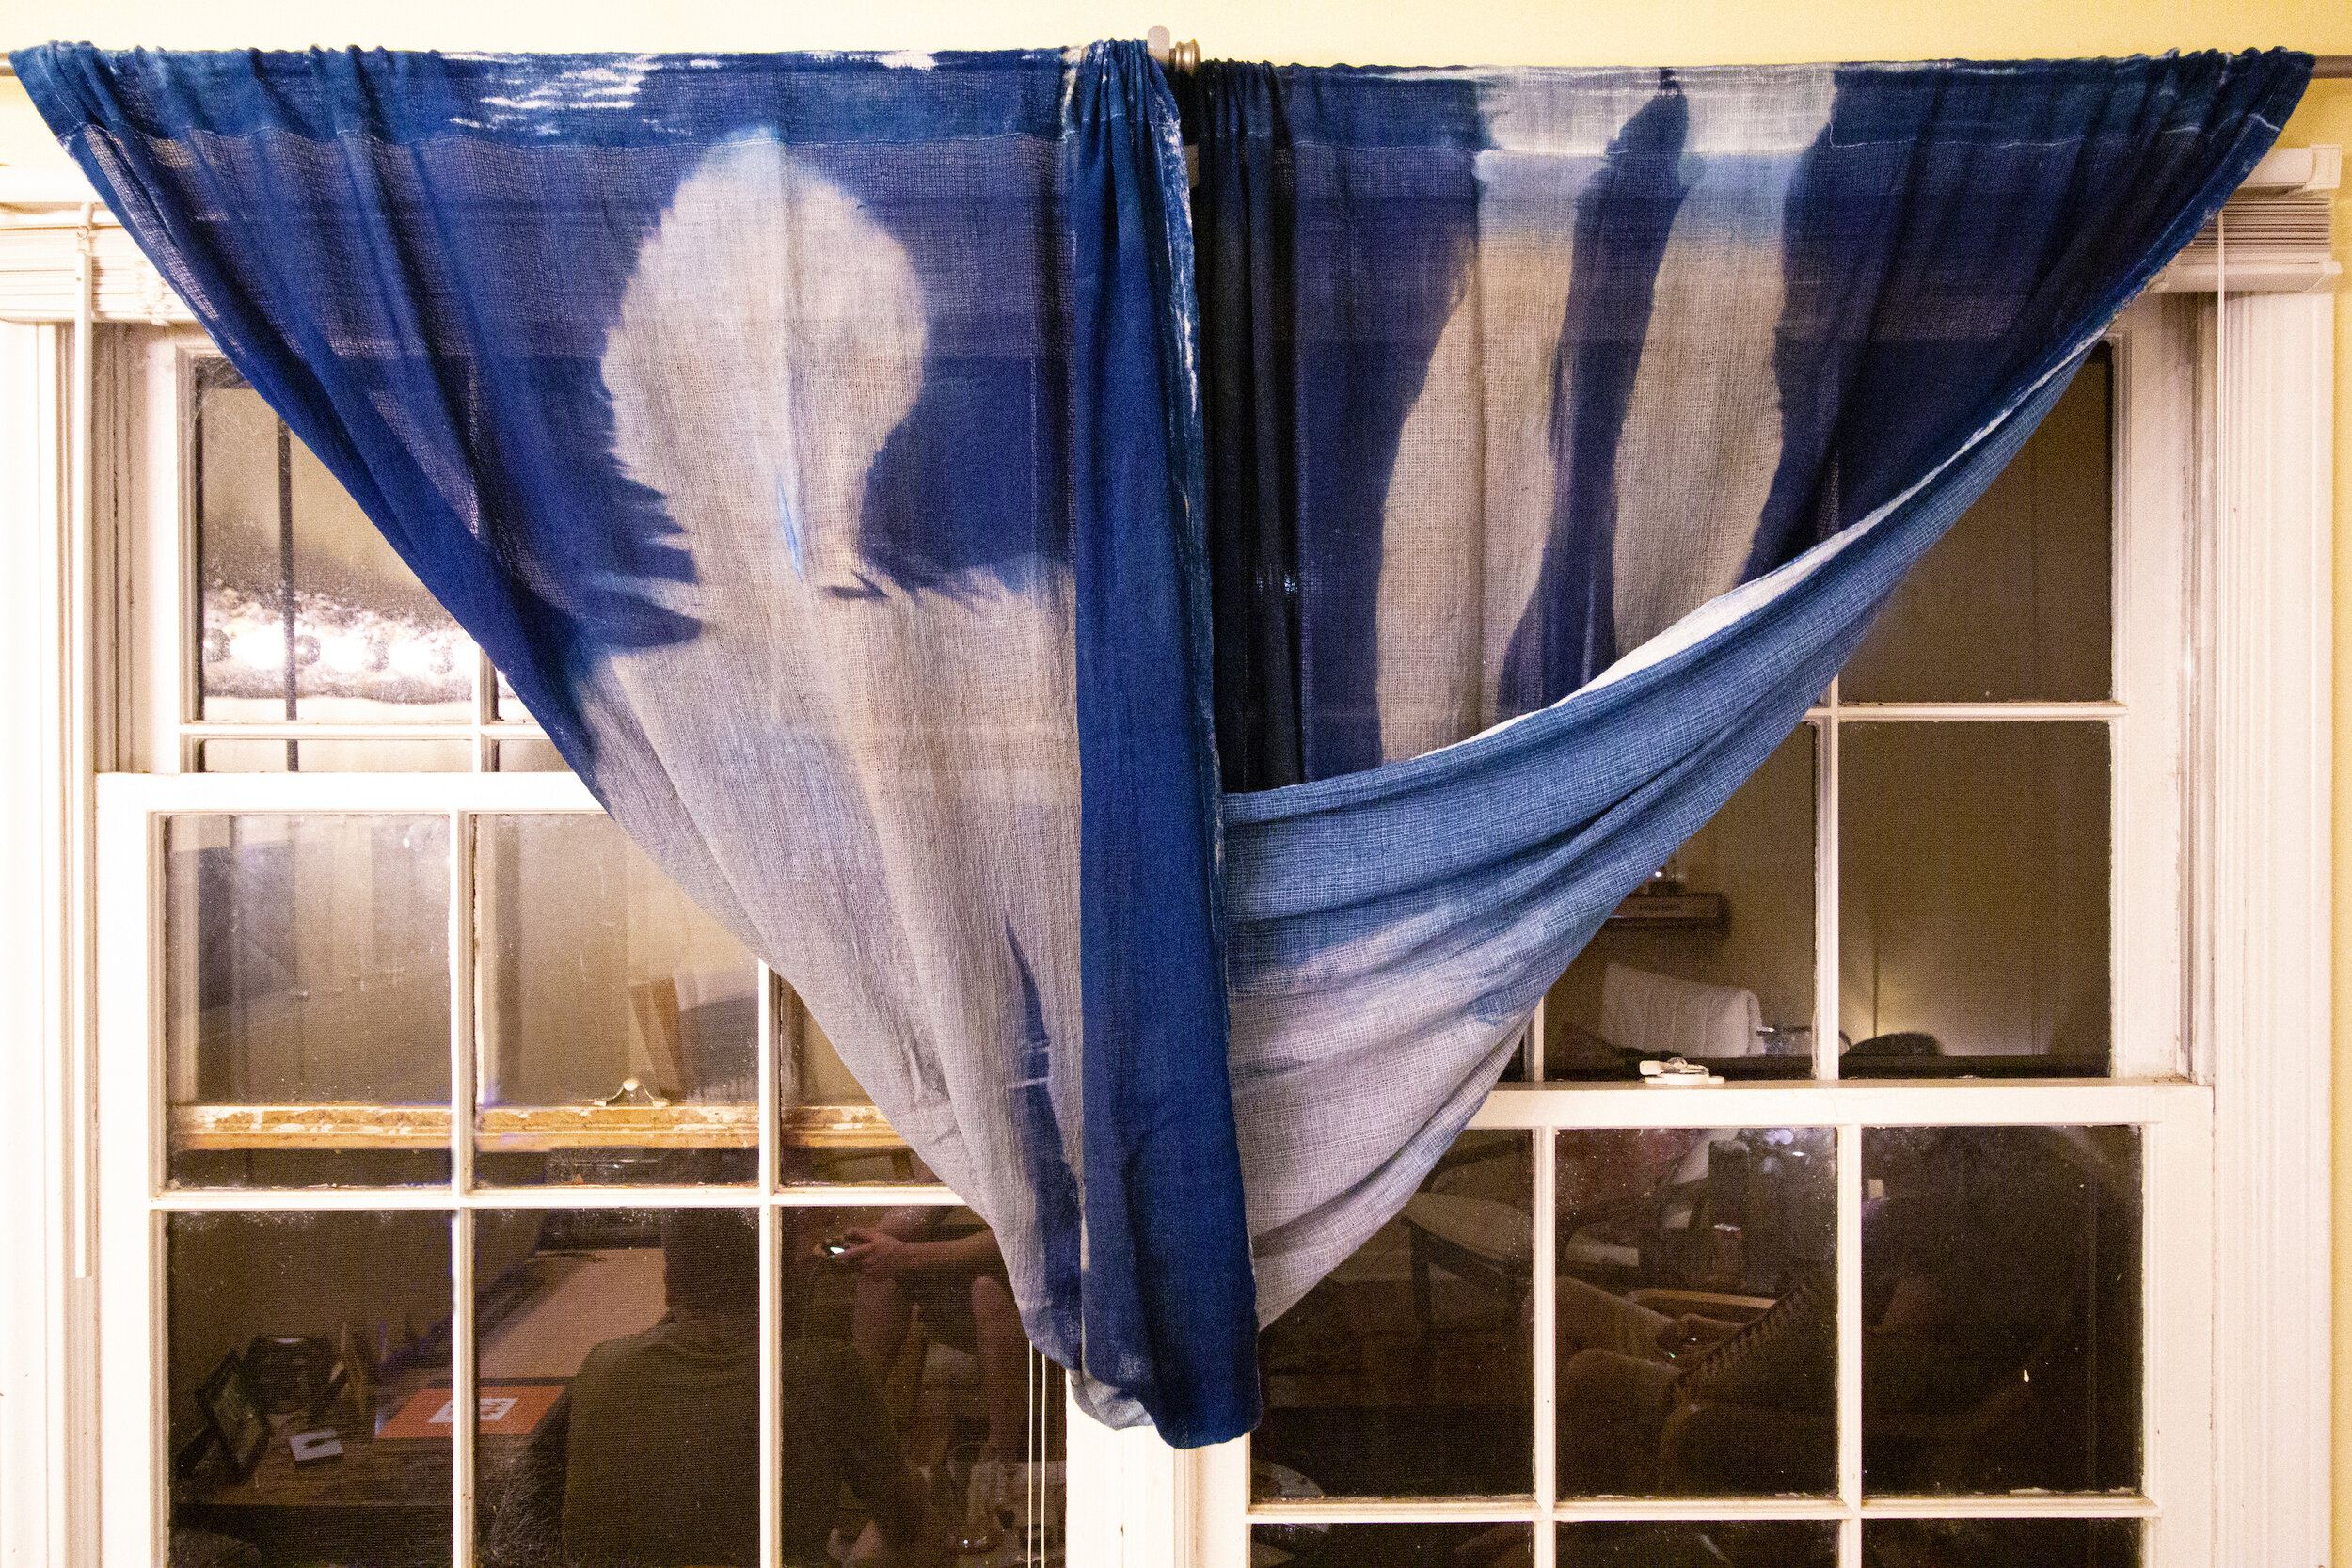 Full Twist [night], 2020, cotton curtain, cyanotype solution, curtain rod, and hardware, 110 x 42 inches